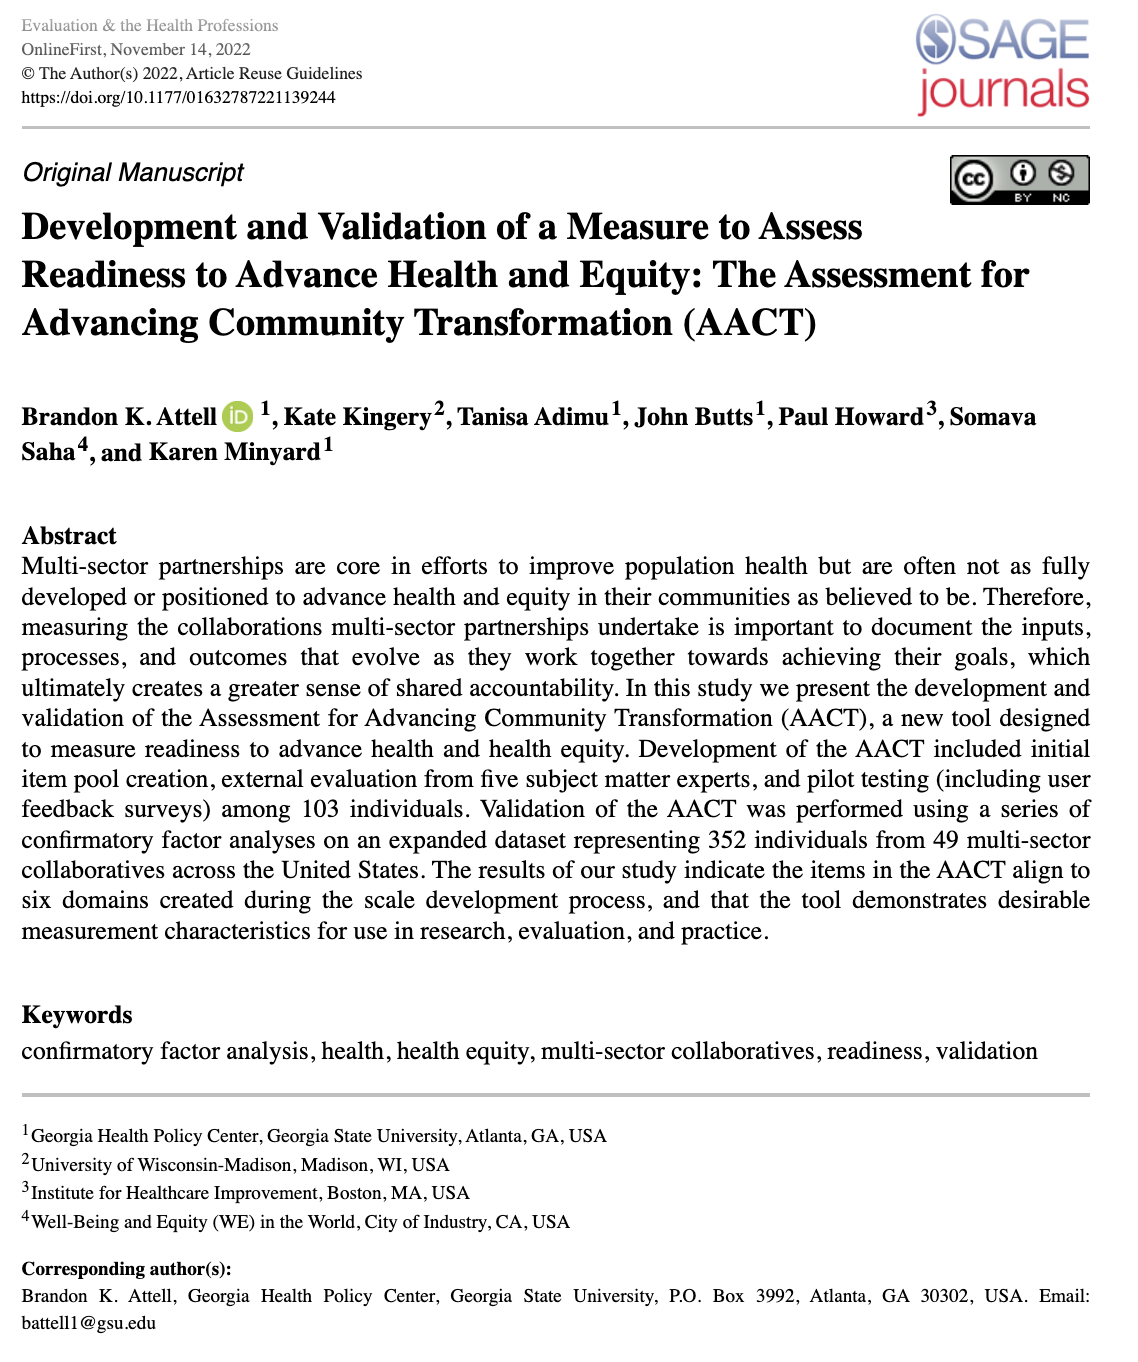 Development and Validation of a Measure to Assess Readiness to Advance Health and Equity: The Assessment for Advancing Community Transformation